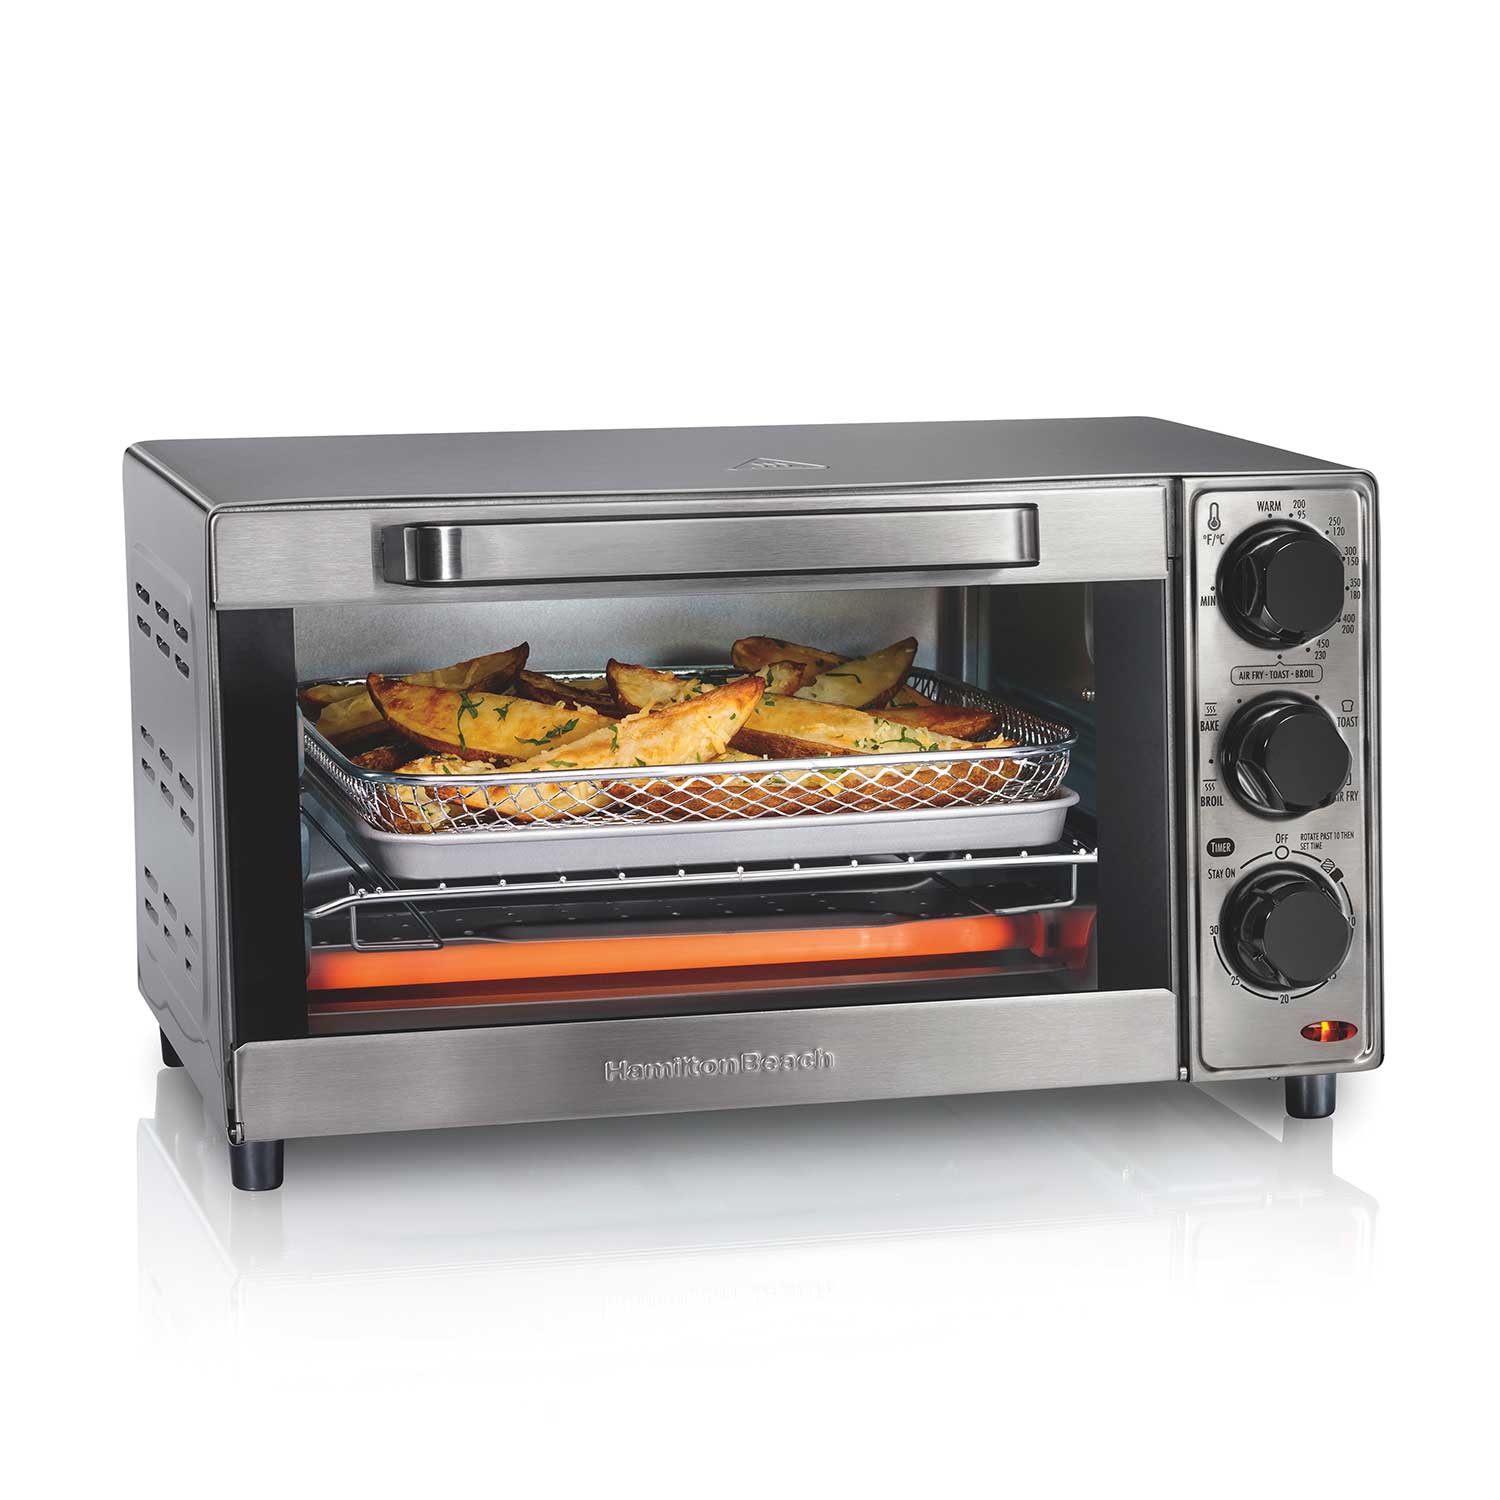 Sure-Crisp<sup>®</sup> Air Fryer Toaster Oven, 4 Slice Capacity, Stainless Steel (31403)